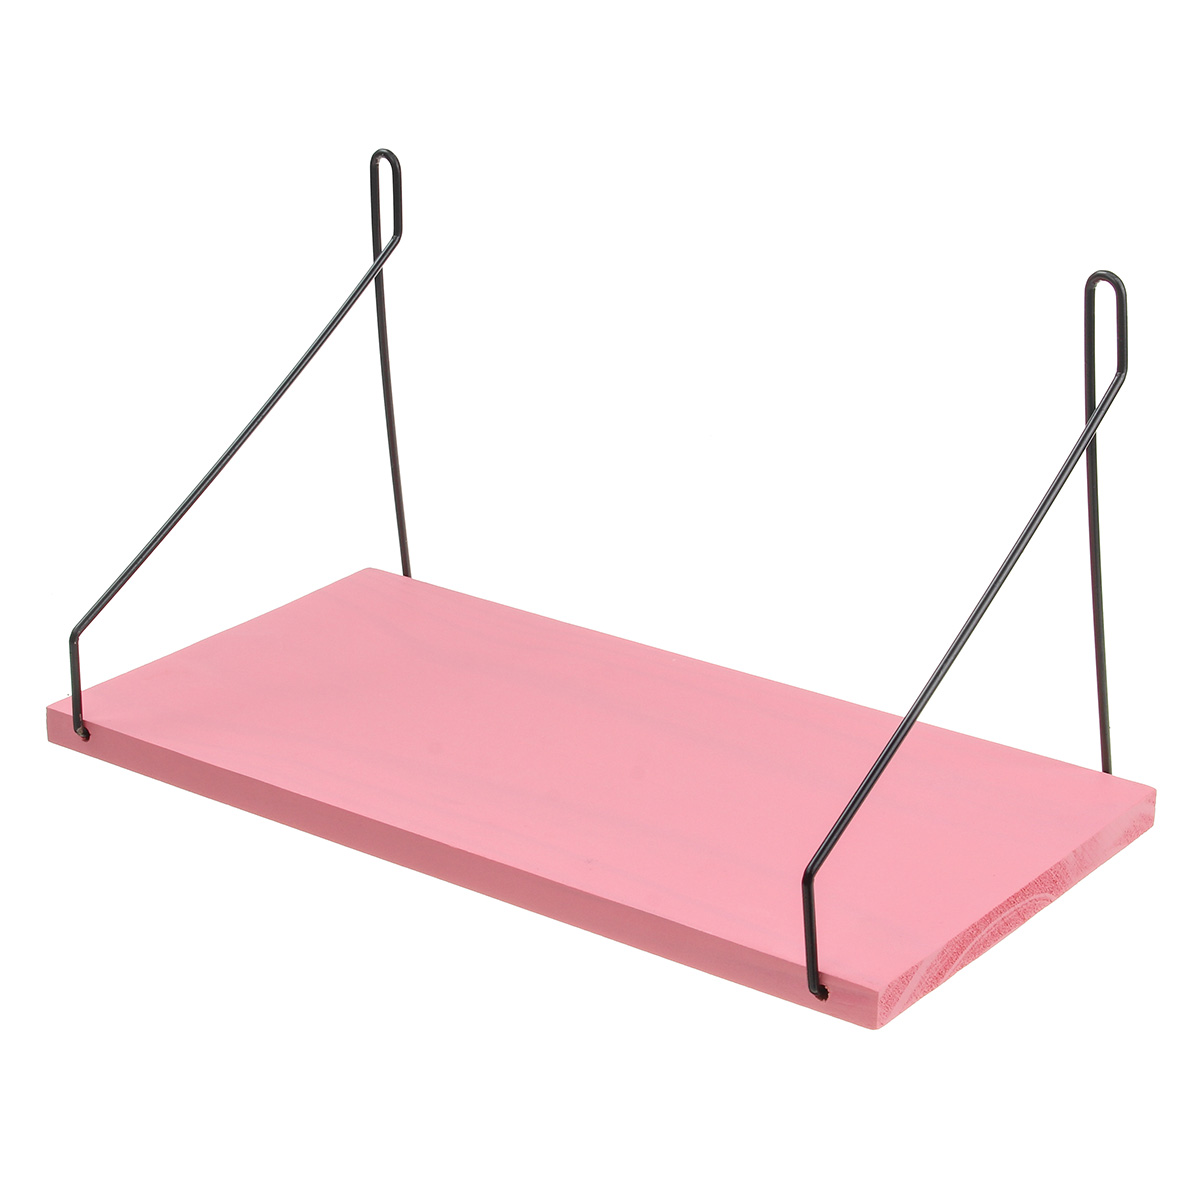 1PC-Length-30CM40CM50CM-Pink-Wall-Mounted-Industrial-Retro-Assemble-Wood-Shelf-Organization-For-Indo-1587220-3